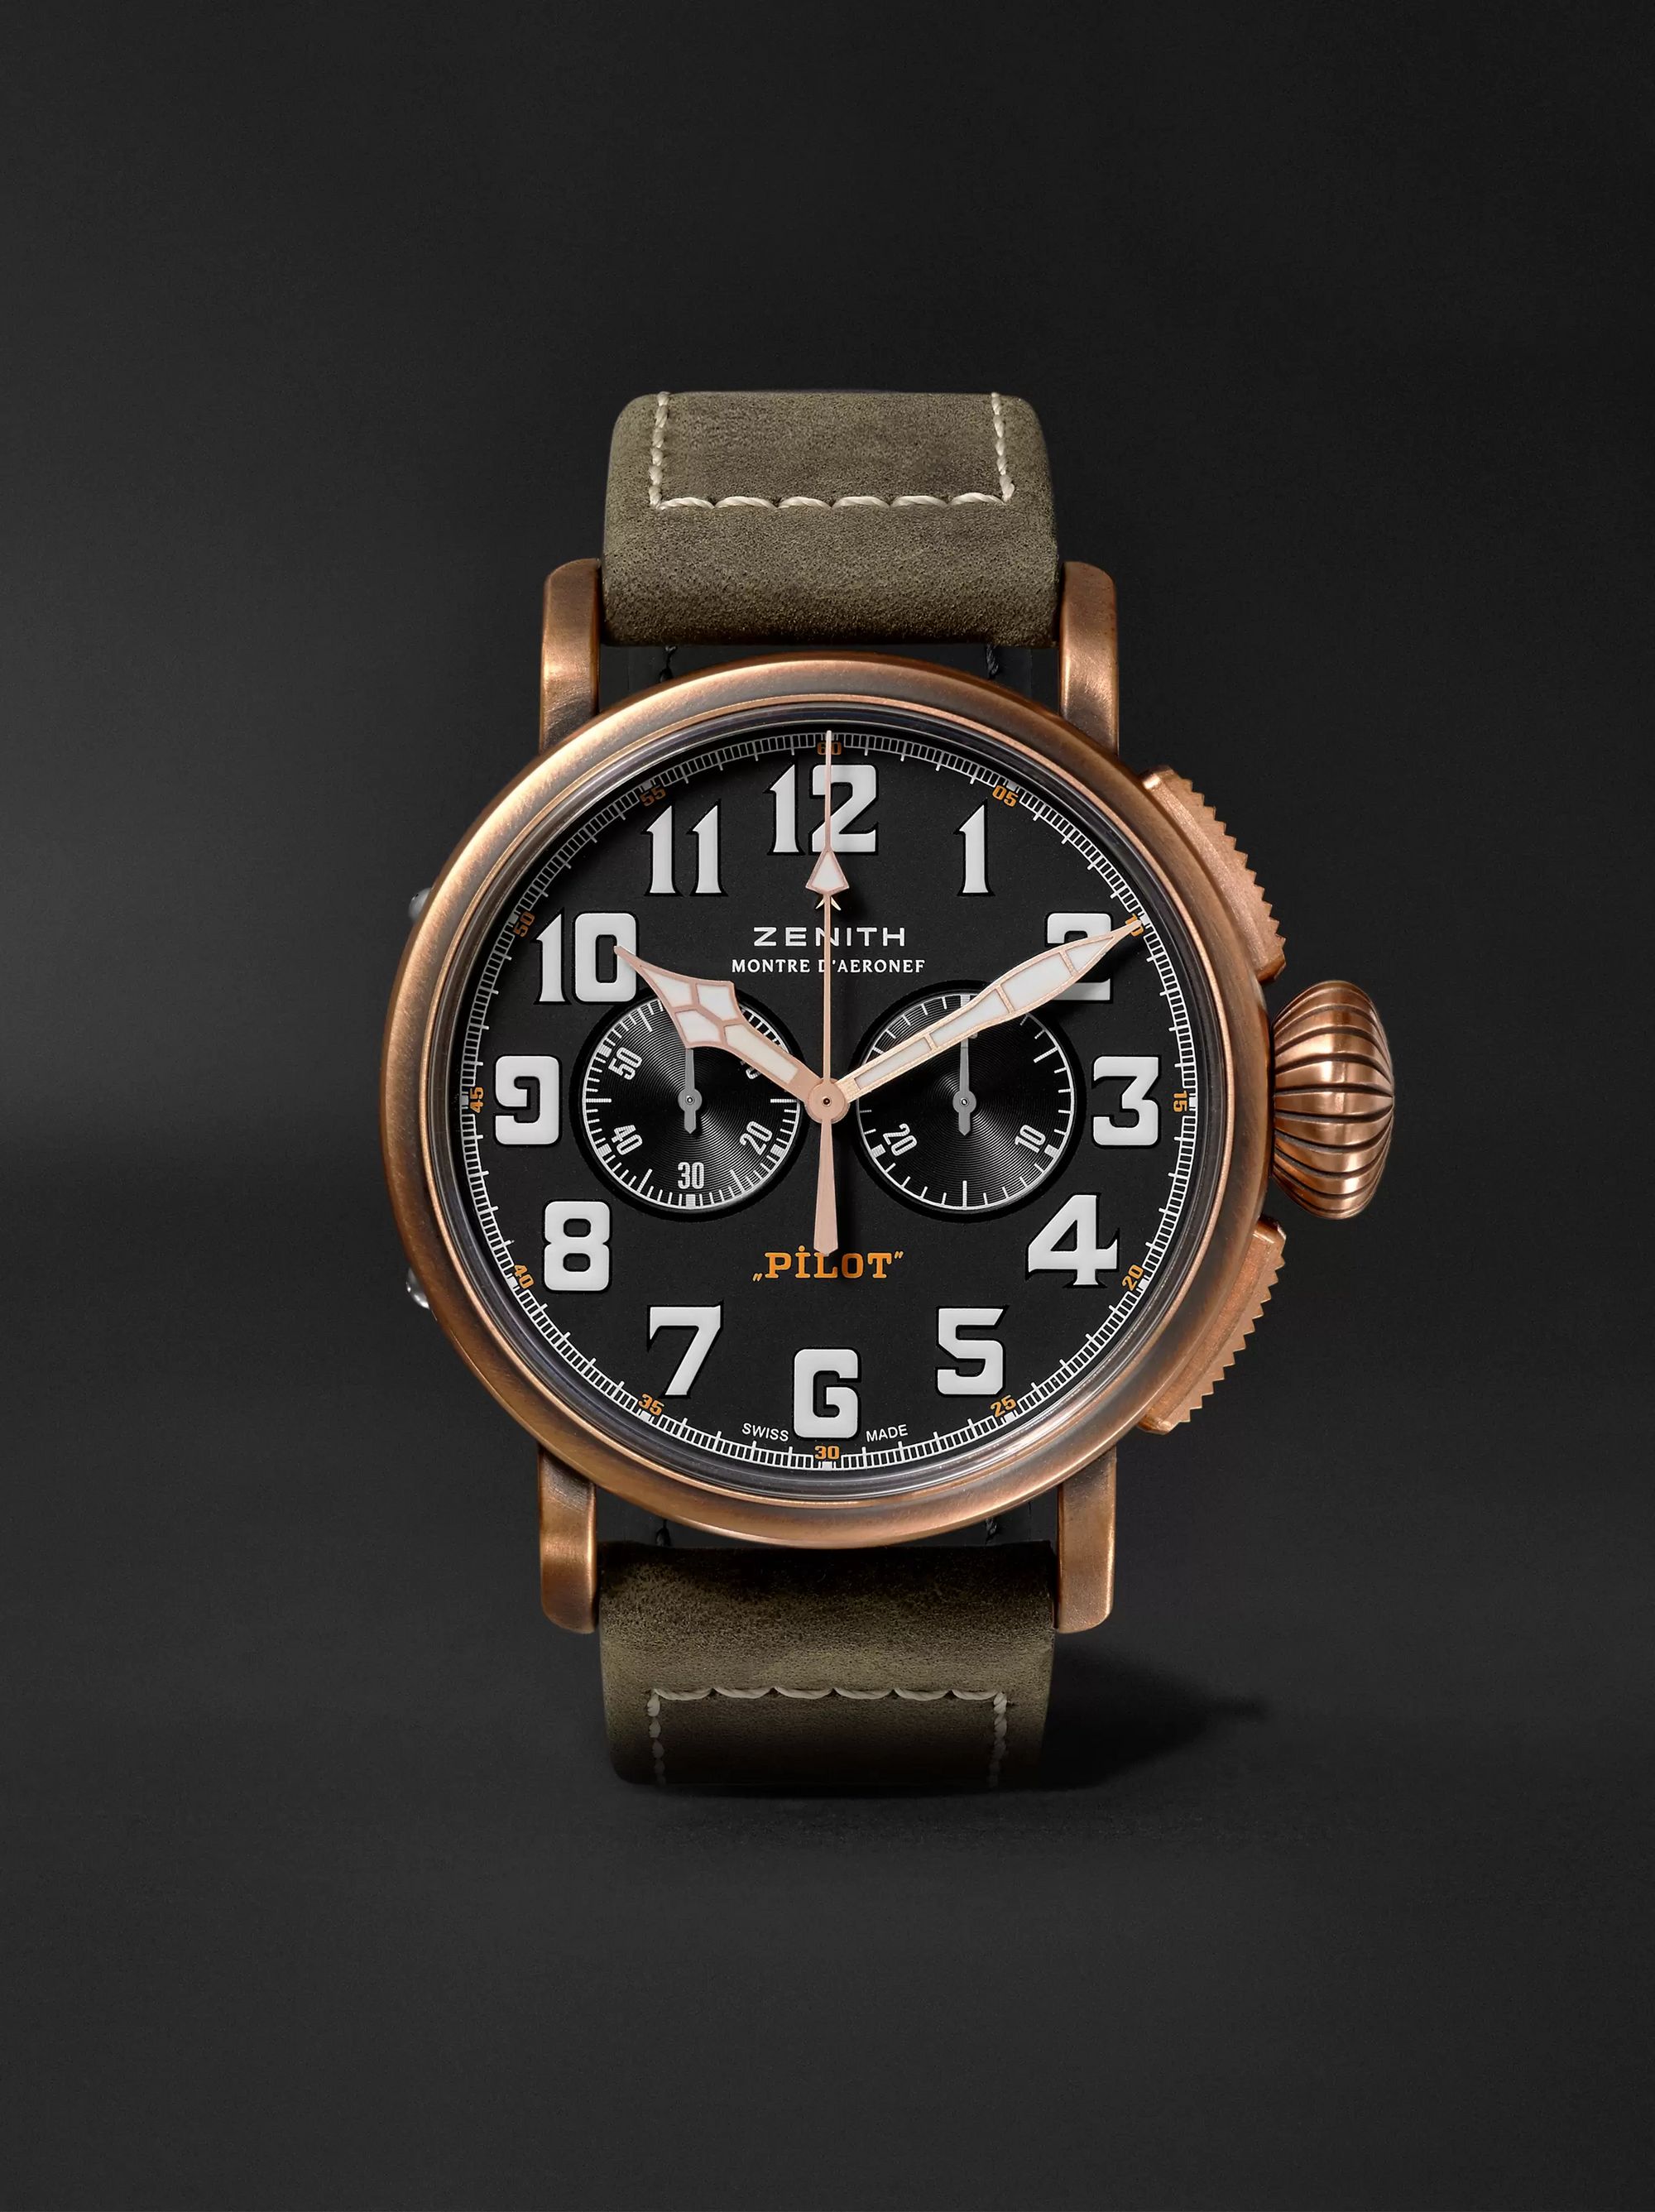 ZENITH Pilot Type 20 Extra Special Automatic Chronograph 45mm Bronze and Nubuck Watch, Ref. No. 29.2430.4069/21.C800